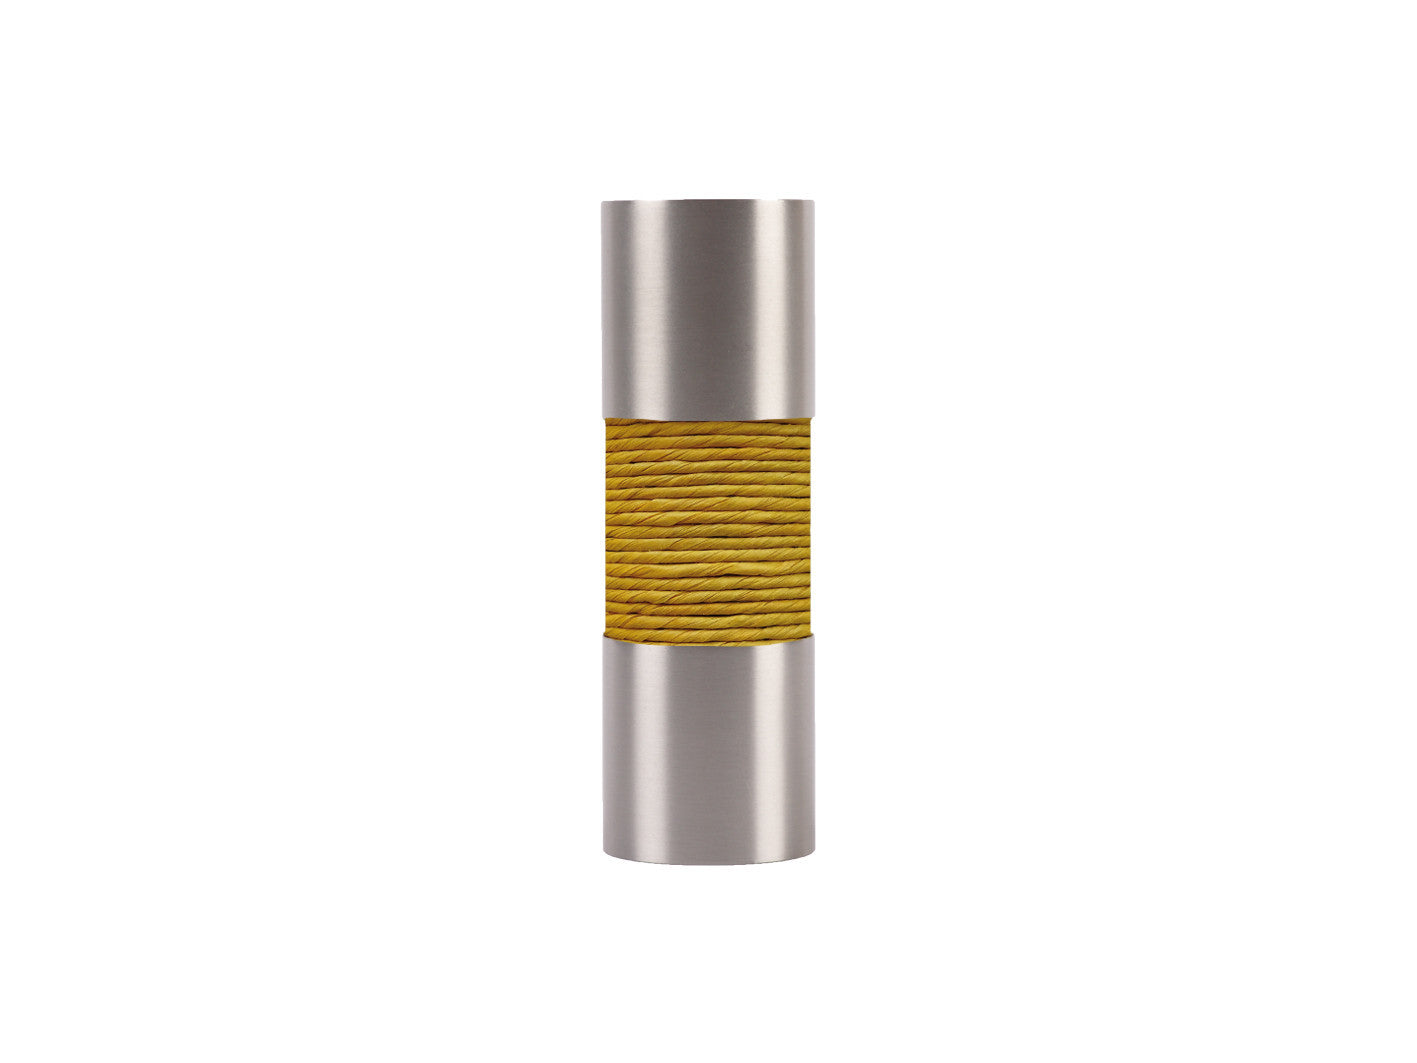 Ochre Yellow curtain pole finial, stainless steel barrel, for 19mm diameter pole